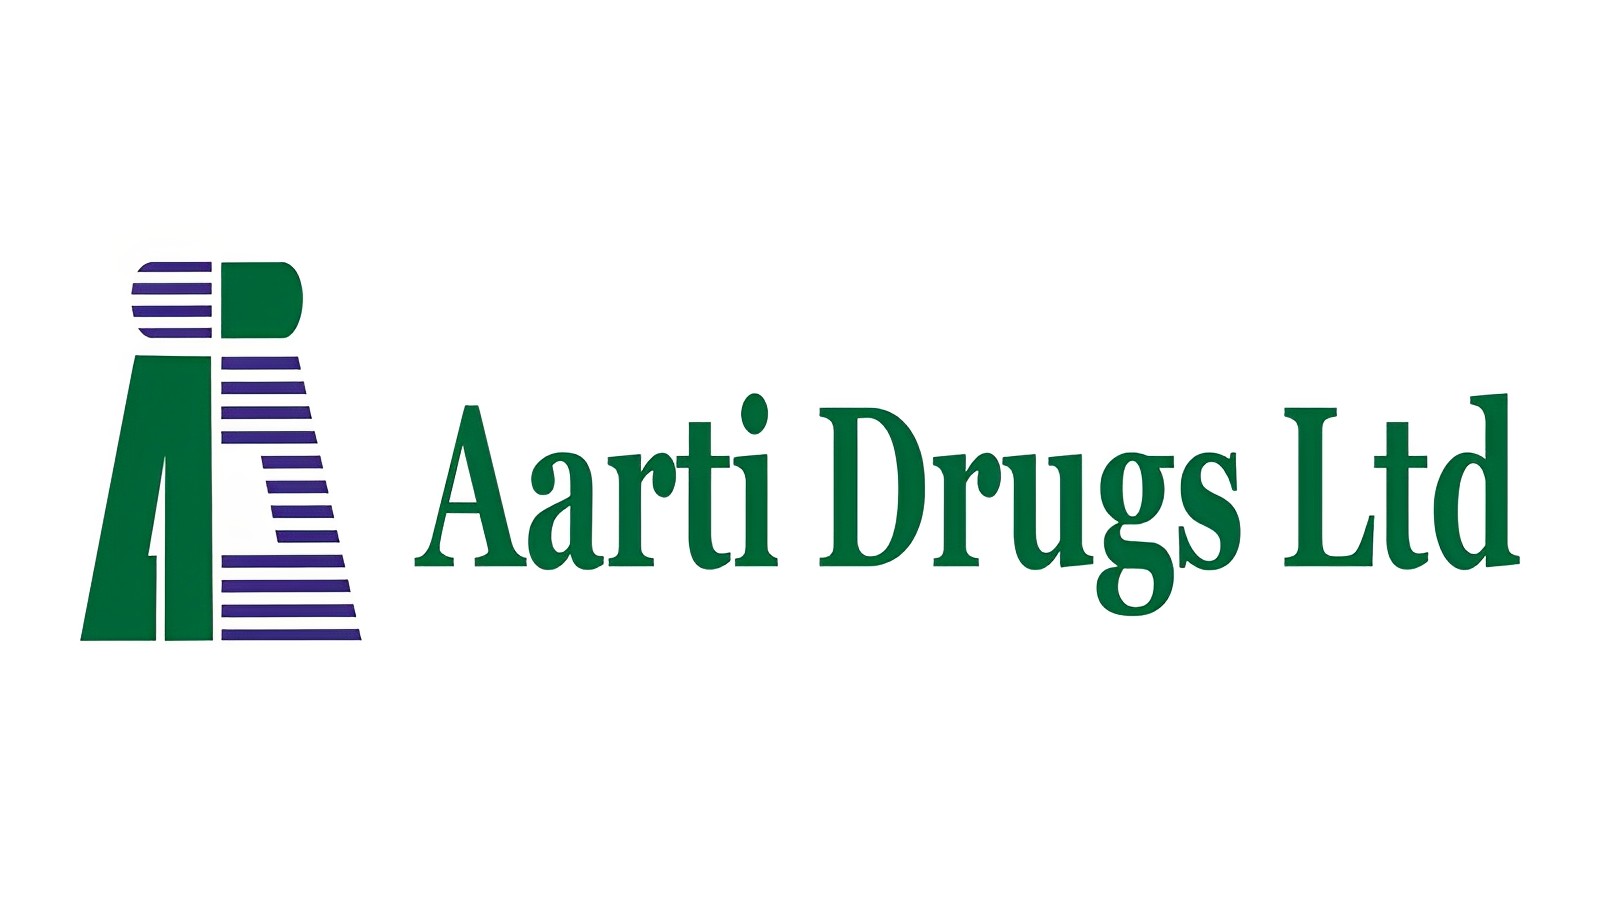 Aarti Drugs Ltd Q3FY23 profit falls to ₹36.68 Cr- consolidated